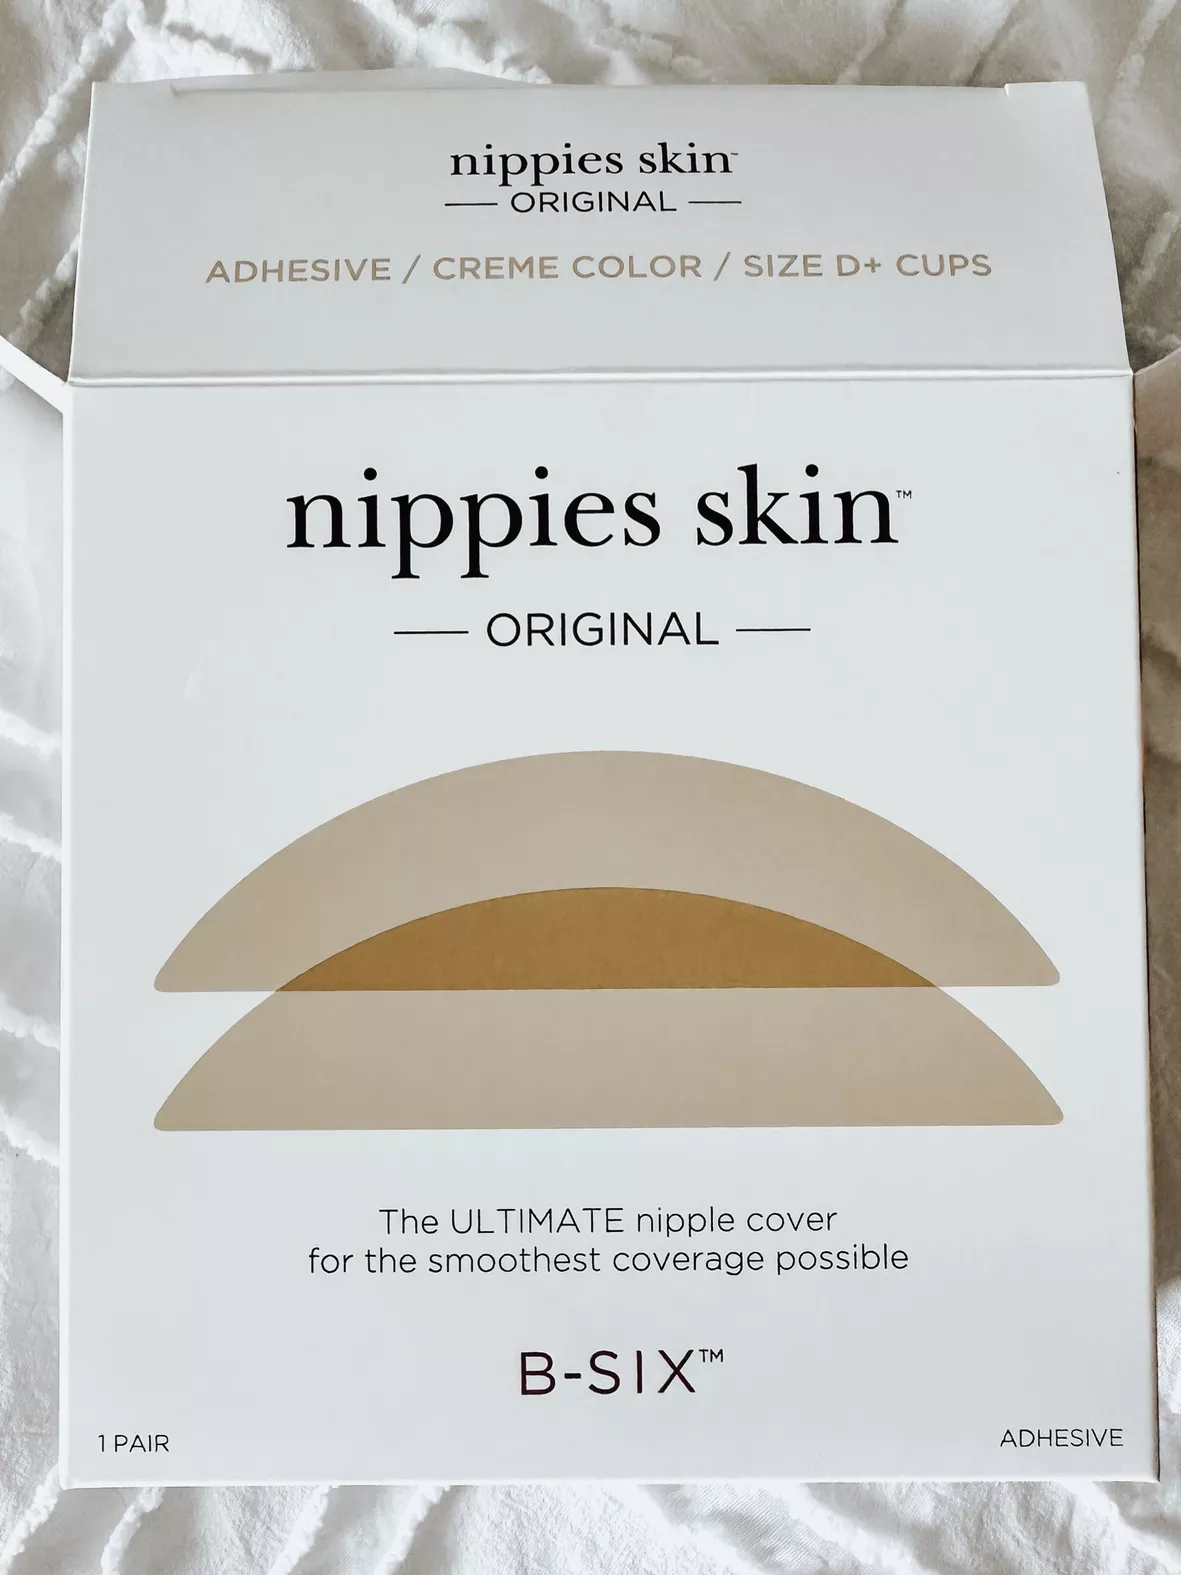 Creme Size 2(D+ Cups)